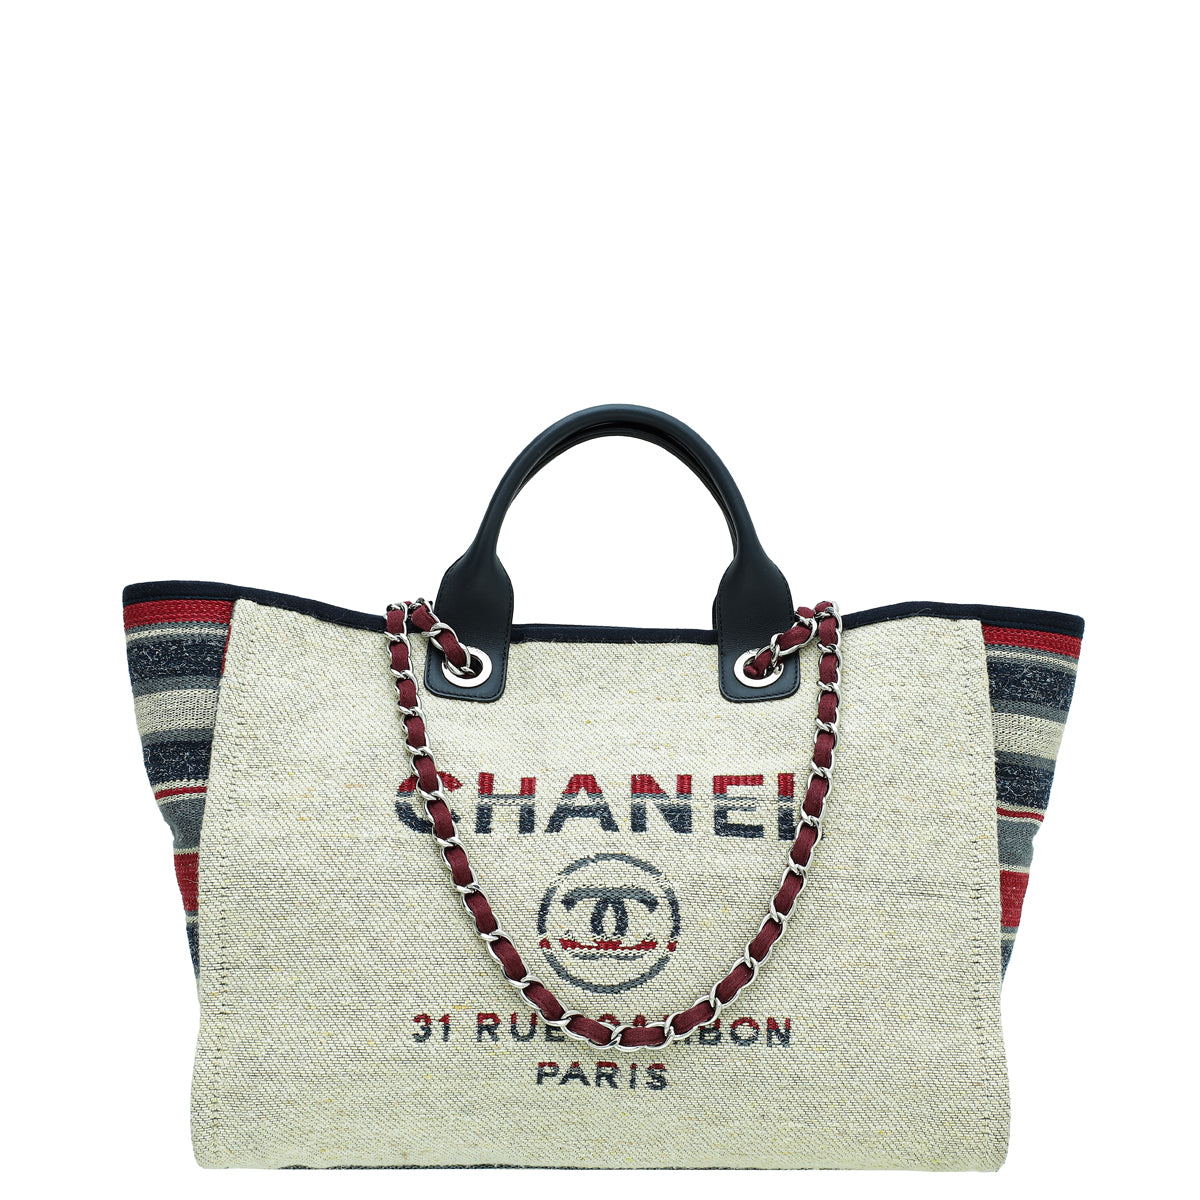 Chanel Beige Multicolor Deauville Shopping Tote Bag